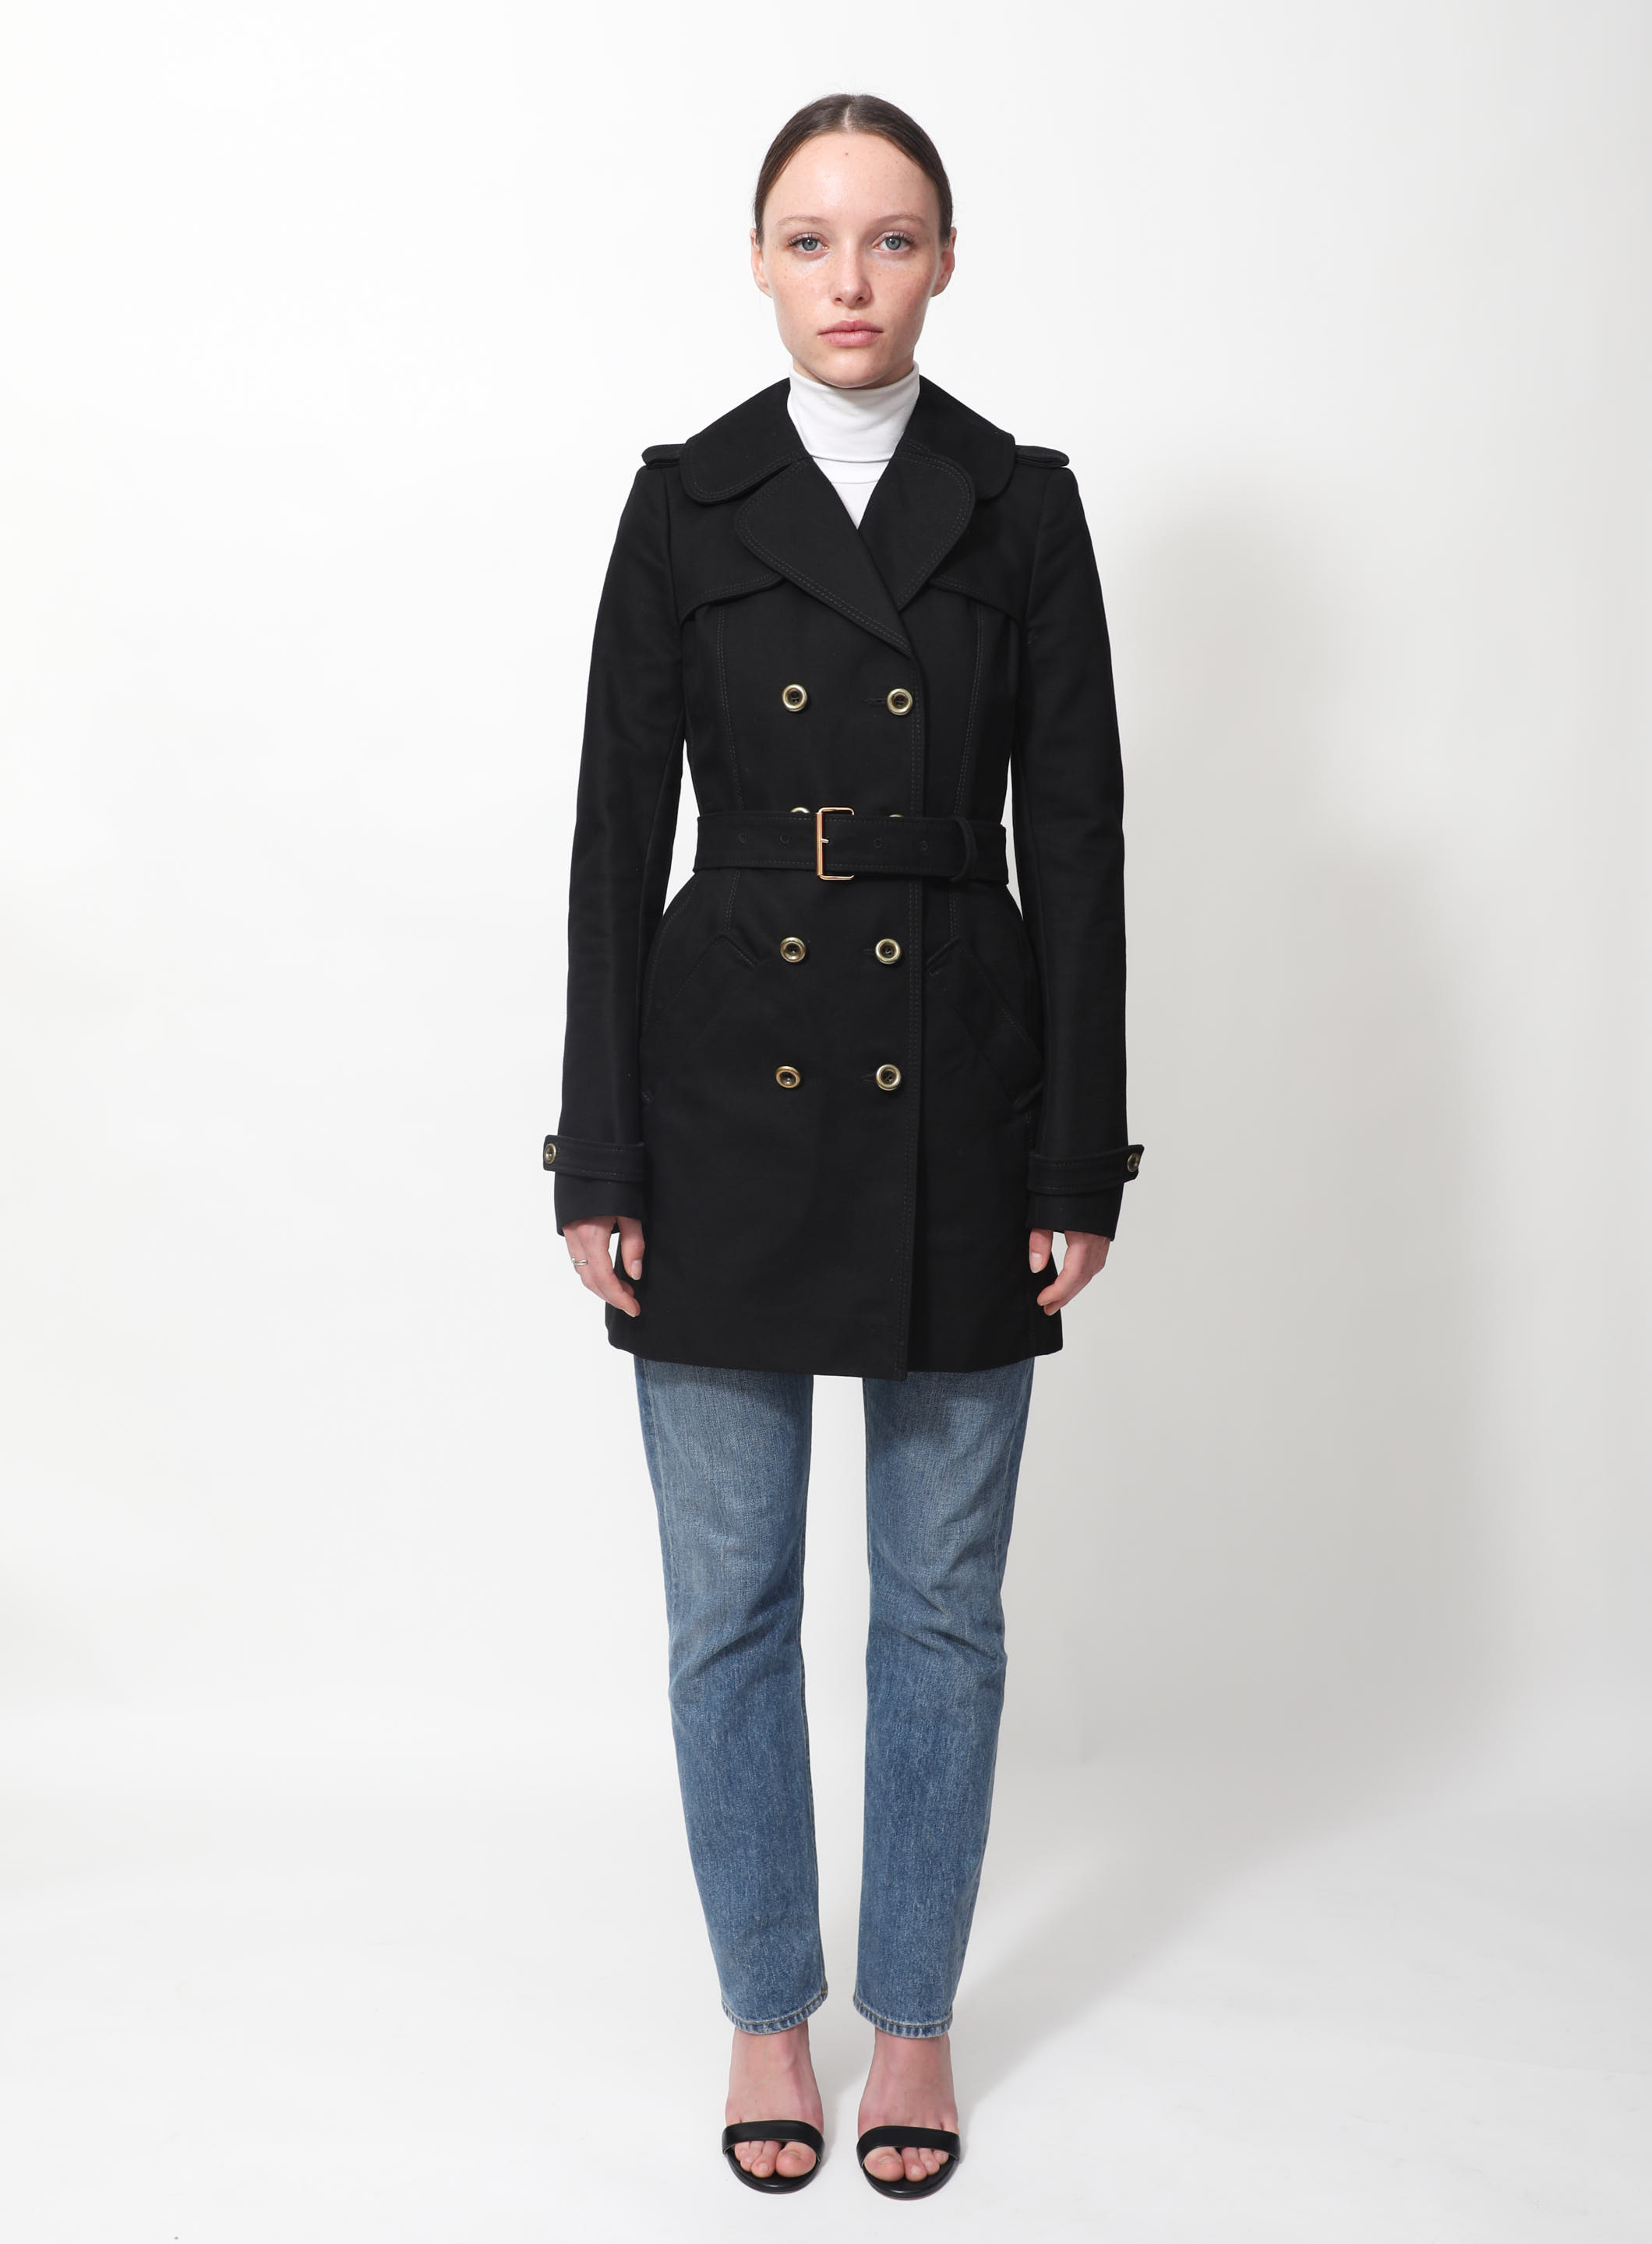 GUCCI Belted pleated cotton-gabardine trench coat